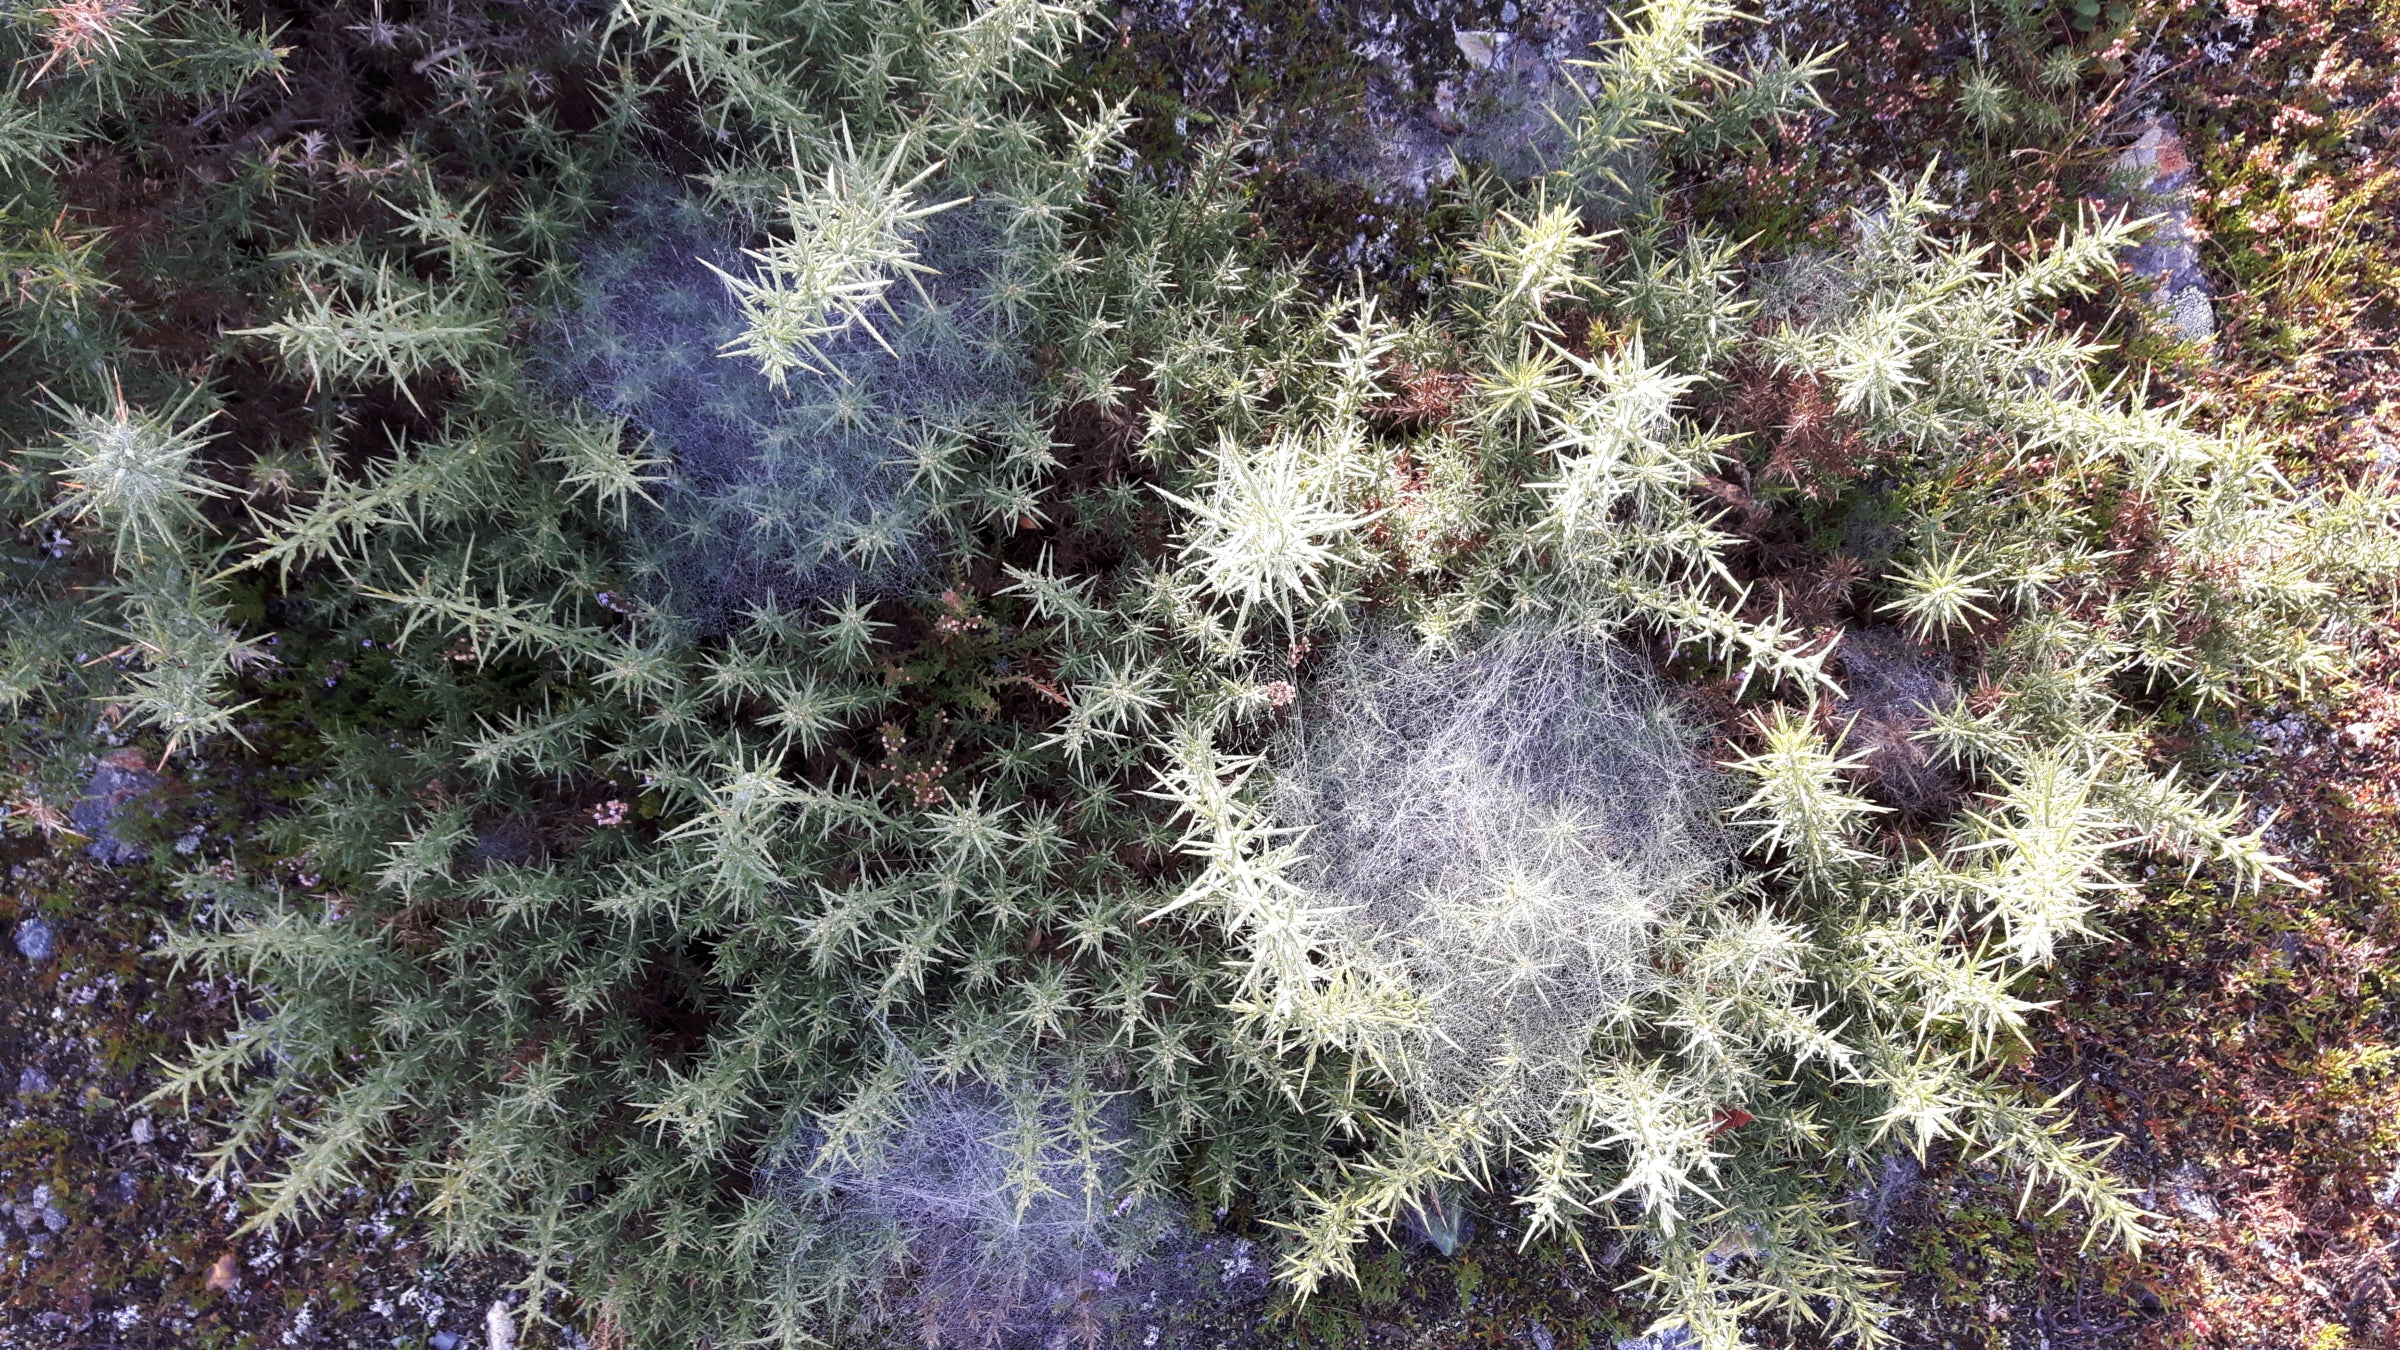 Gorse bushes with extensive cobwebs spread over them, capturing the intricate details of the dew-laden landscape.